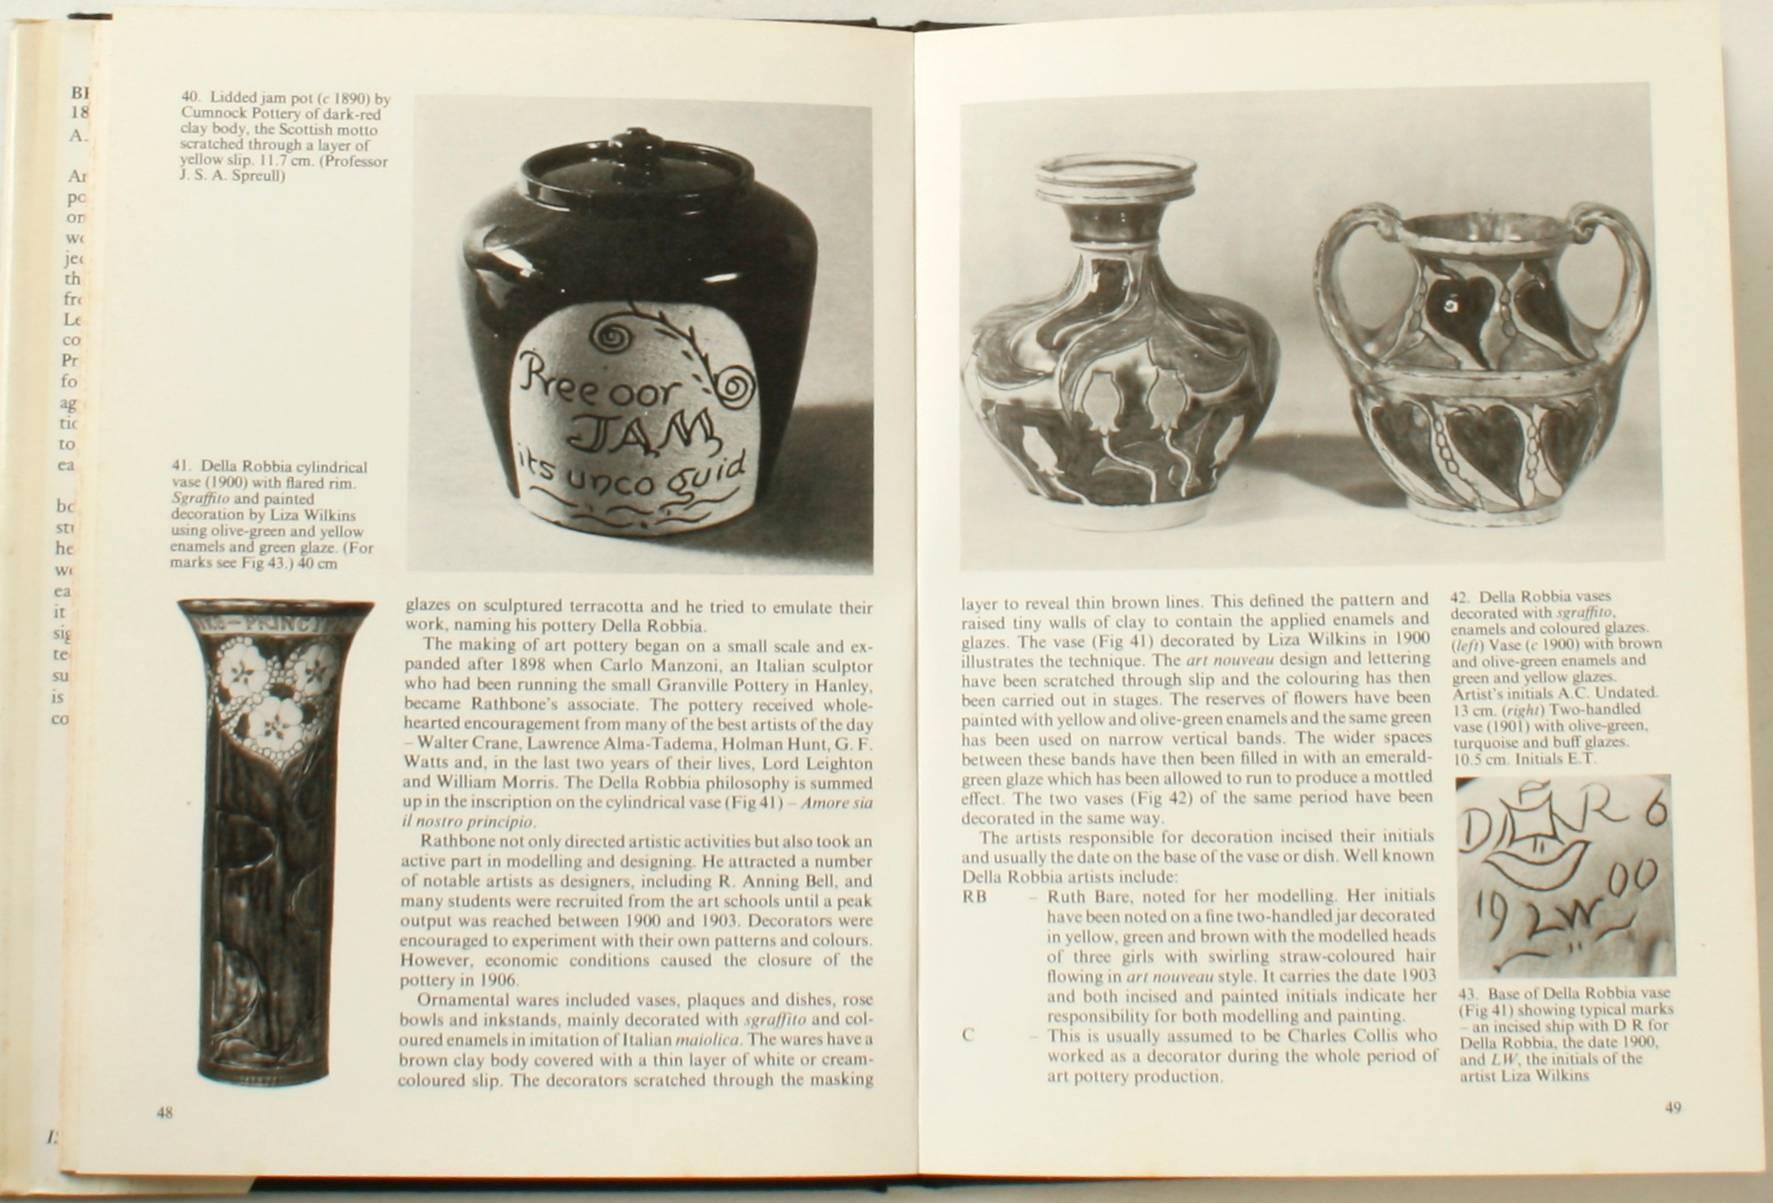 Paper British Art Pottery by A.W. Coysh, First Edition For Sale